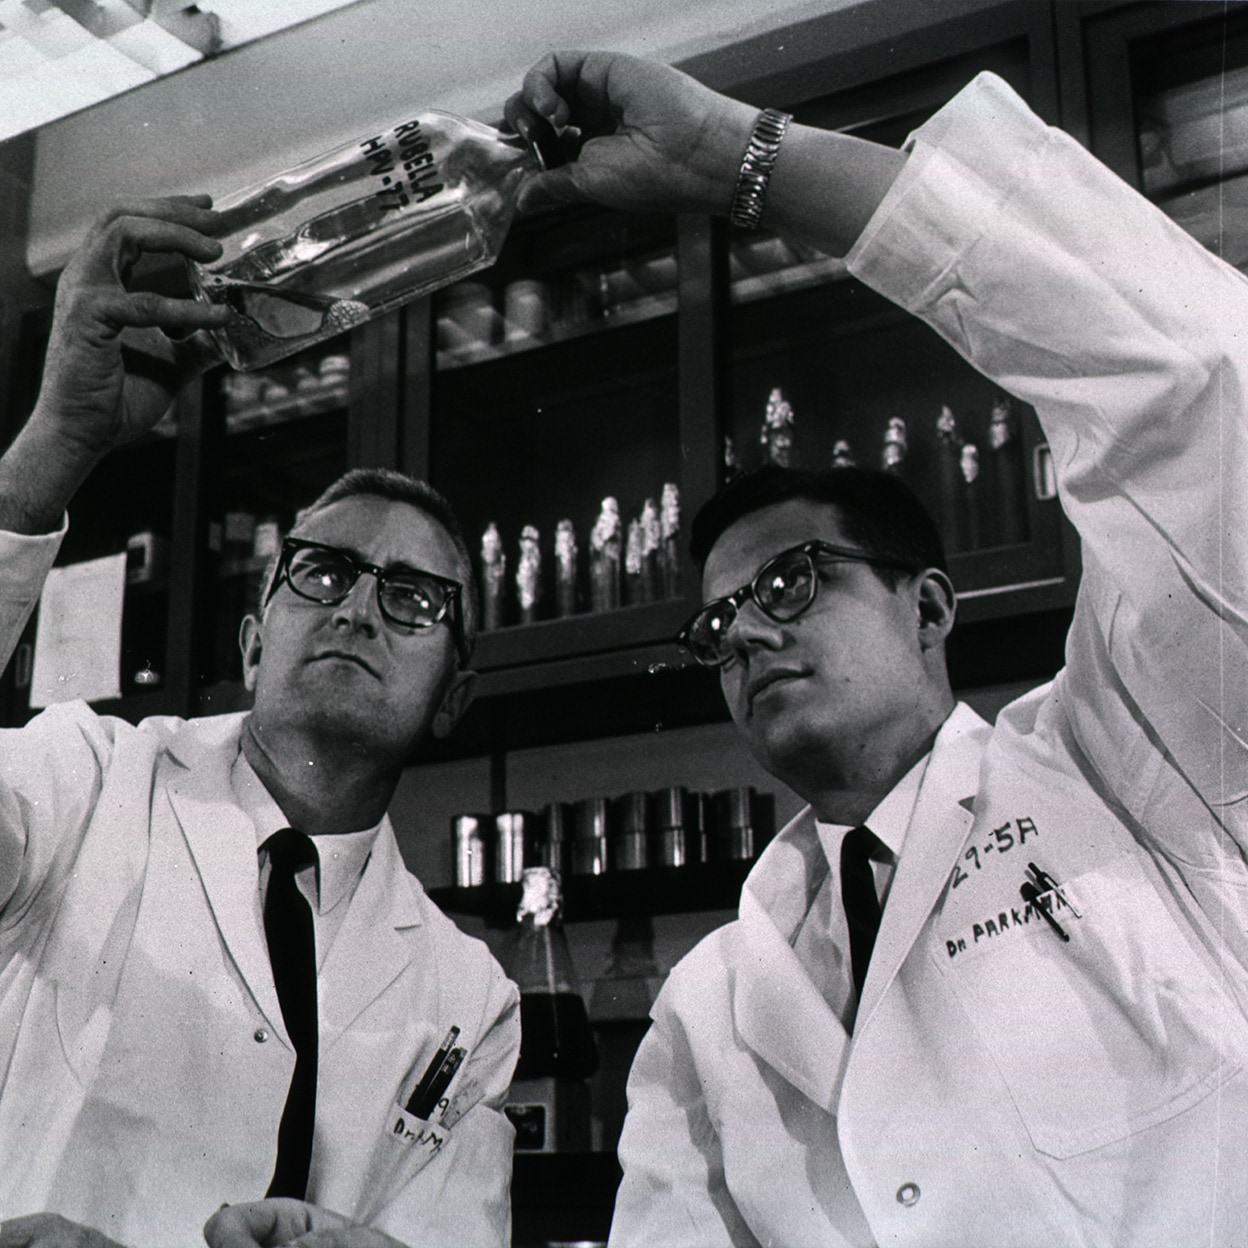 Two men who are scientists hold and look at a bottle of rubella vaccine